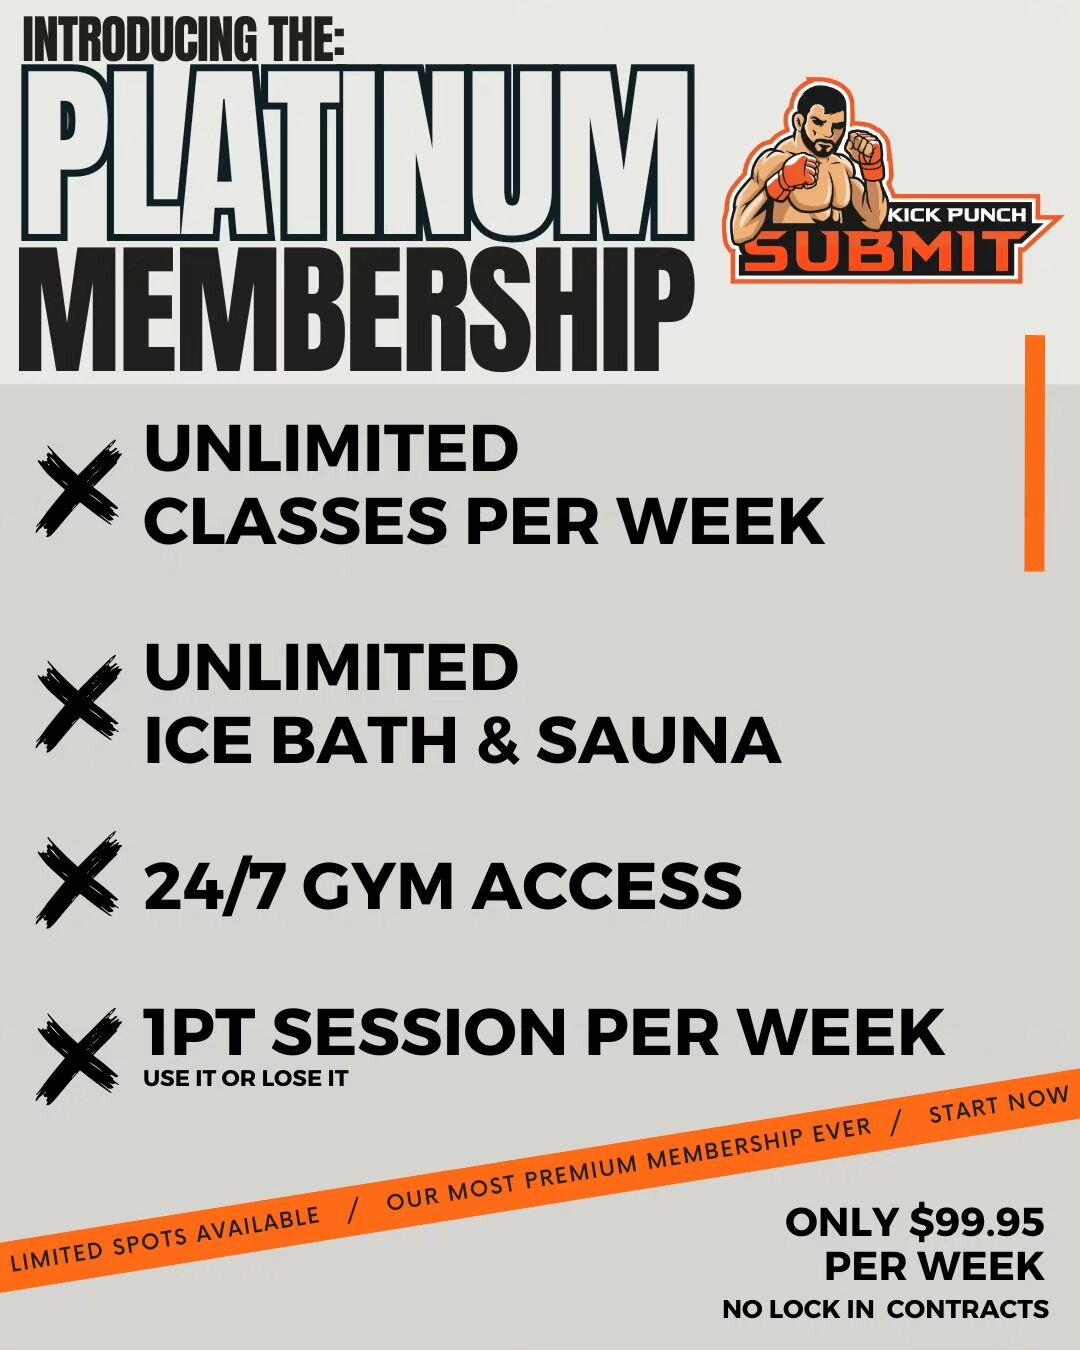 Introducing our top tier membership! With the platinum membership you get 1 PT session included EVERY WEEK!. That means you can attend all classes and focus on your weaknesses or missed details in the private session. This is a must for those looking